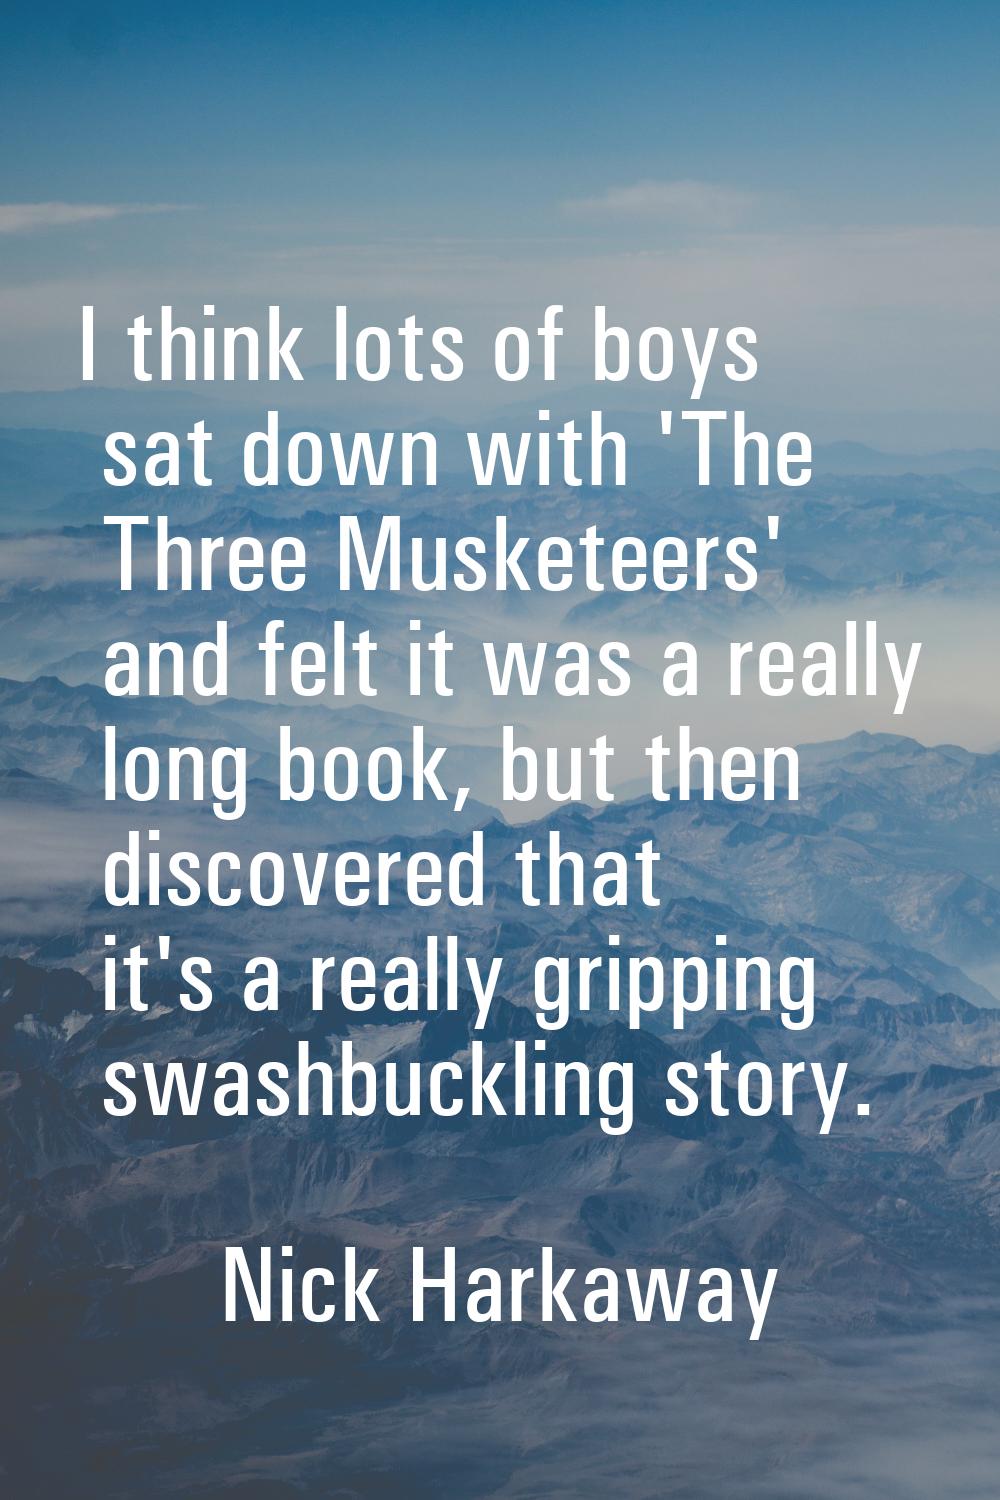 I think lots of boys sat down with 'The Three Musketeers' and felt it was a really long book, but t